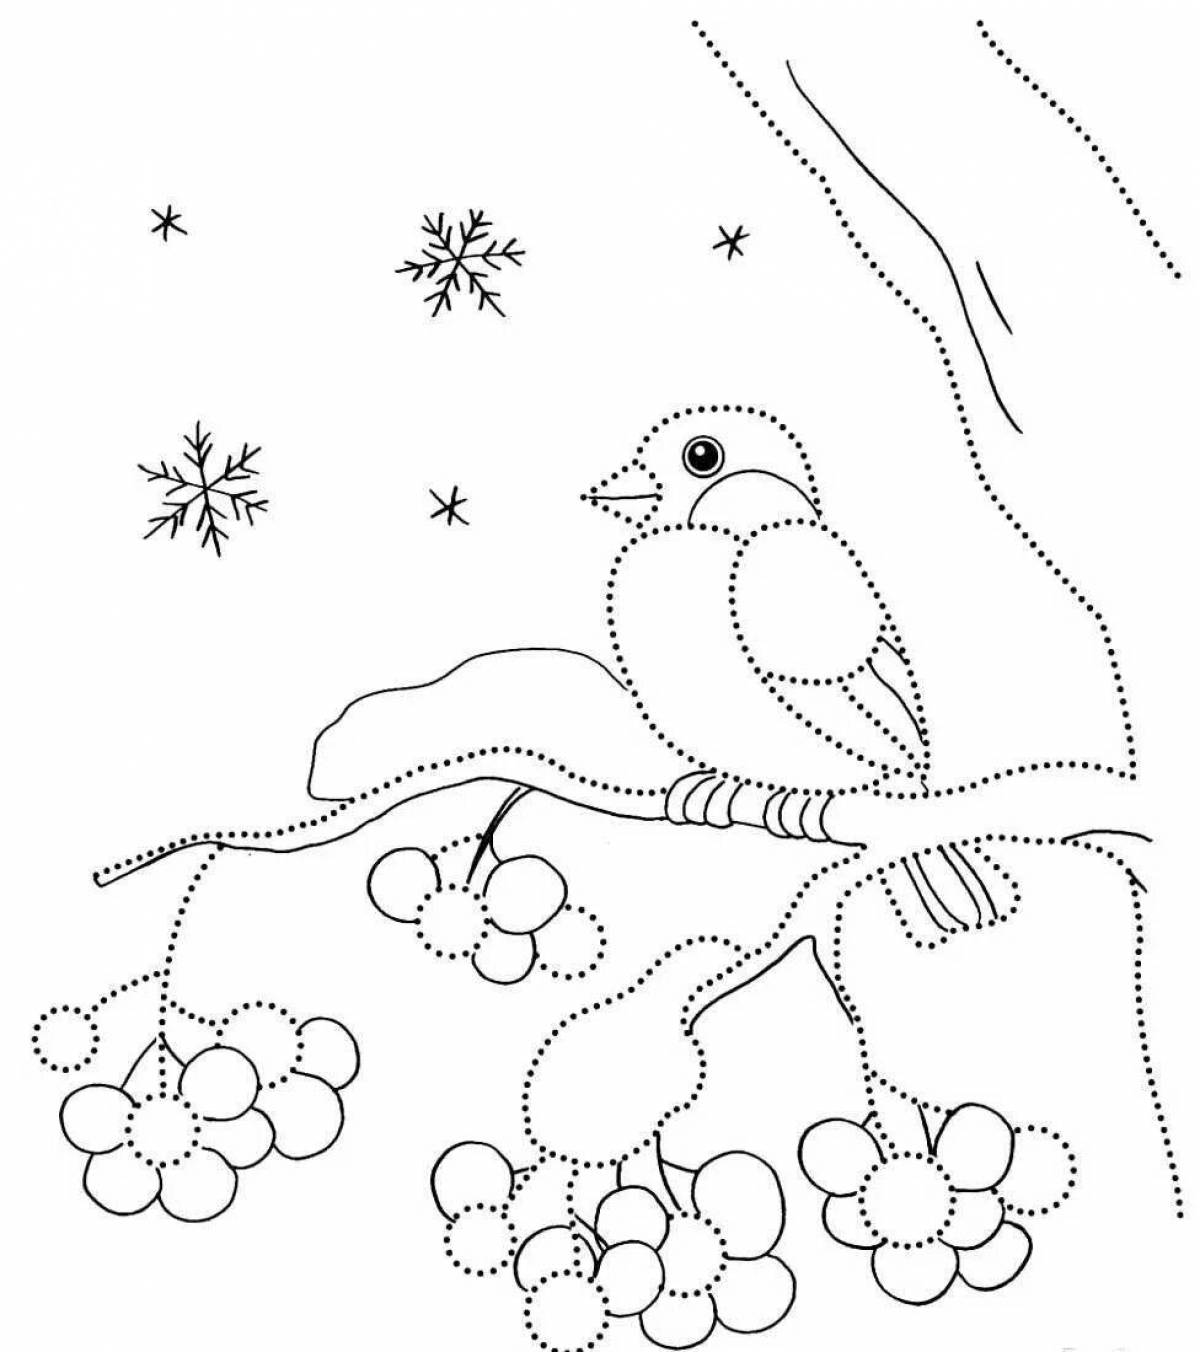 Coloring for joyful winter forest for children 4-5 years old